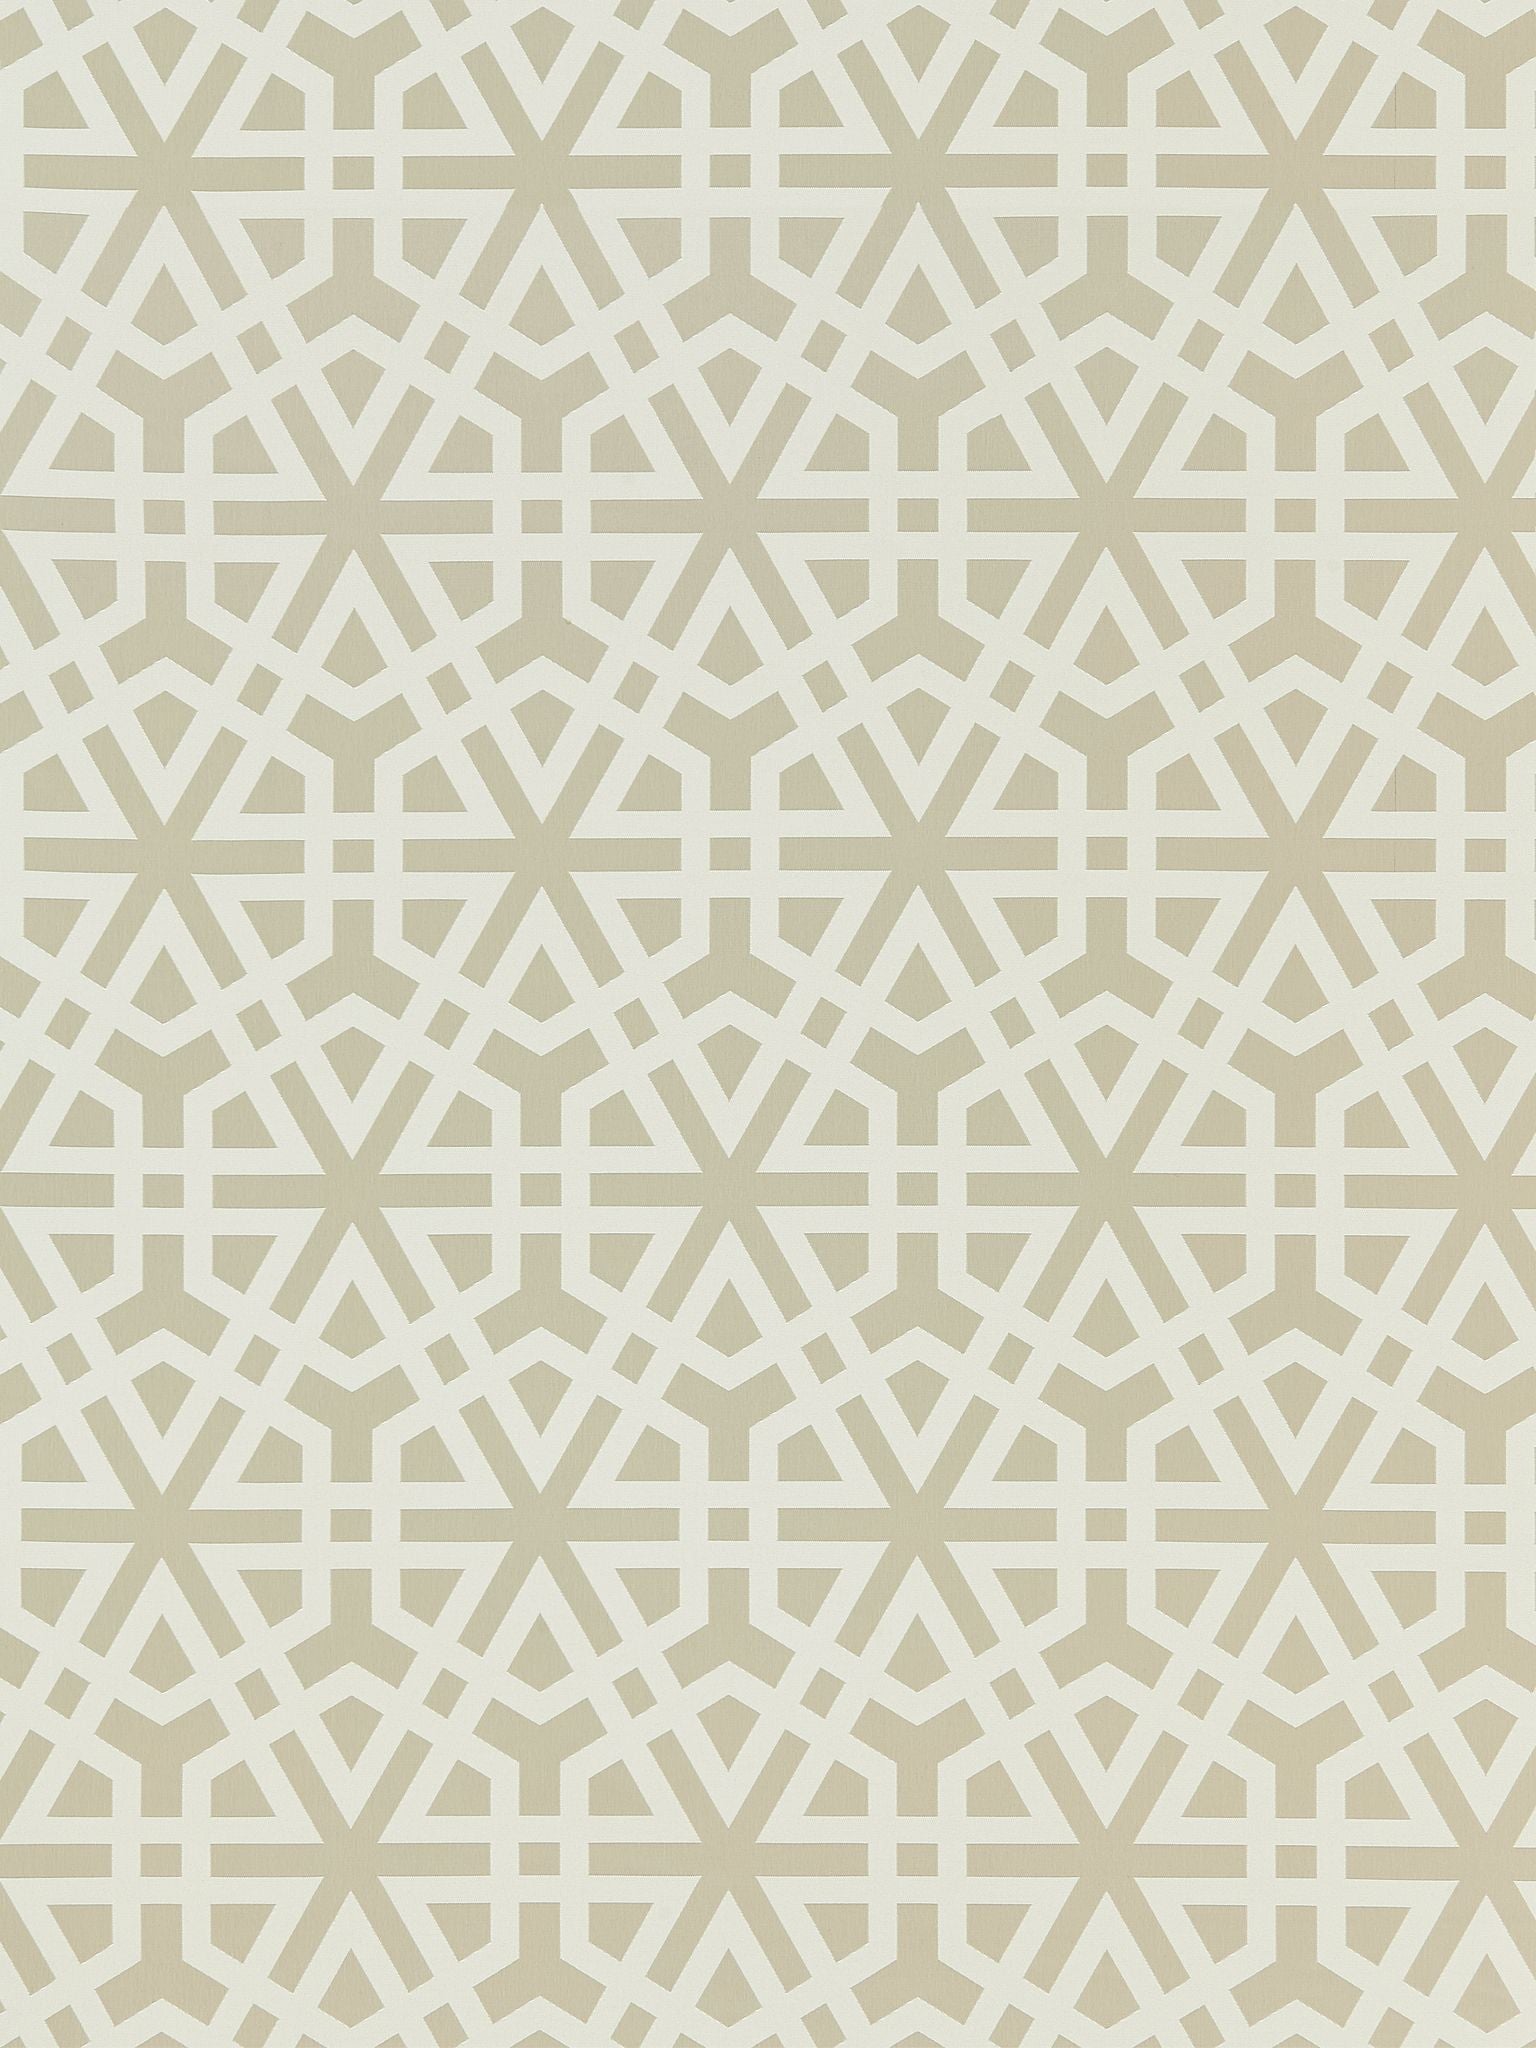 Lisbon Weave fabric in linen color - pattern number SC 000127198 - by Scalamandre in the Scalamandre Fabrics Book 1 collection